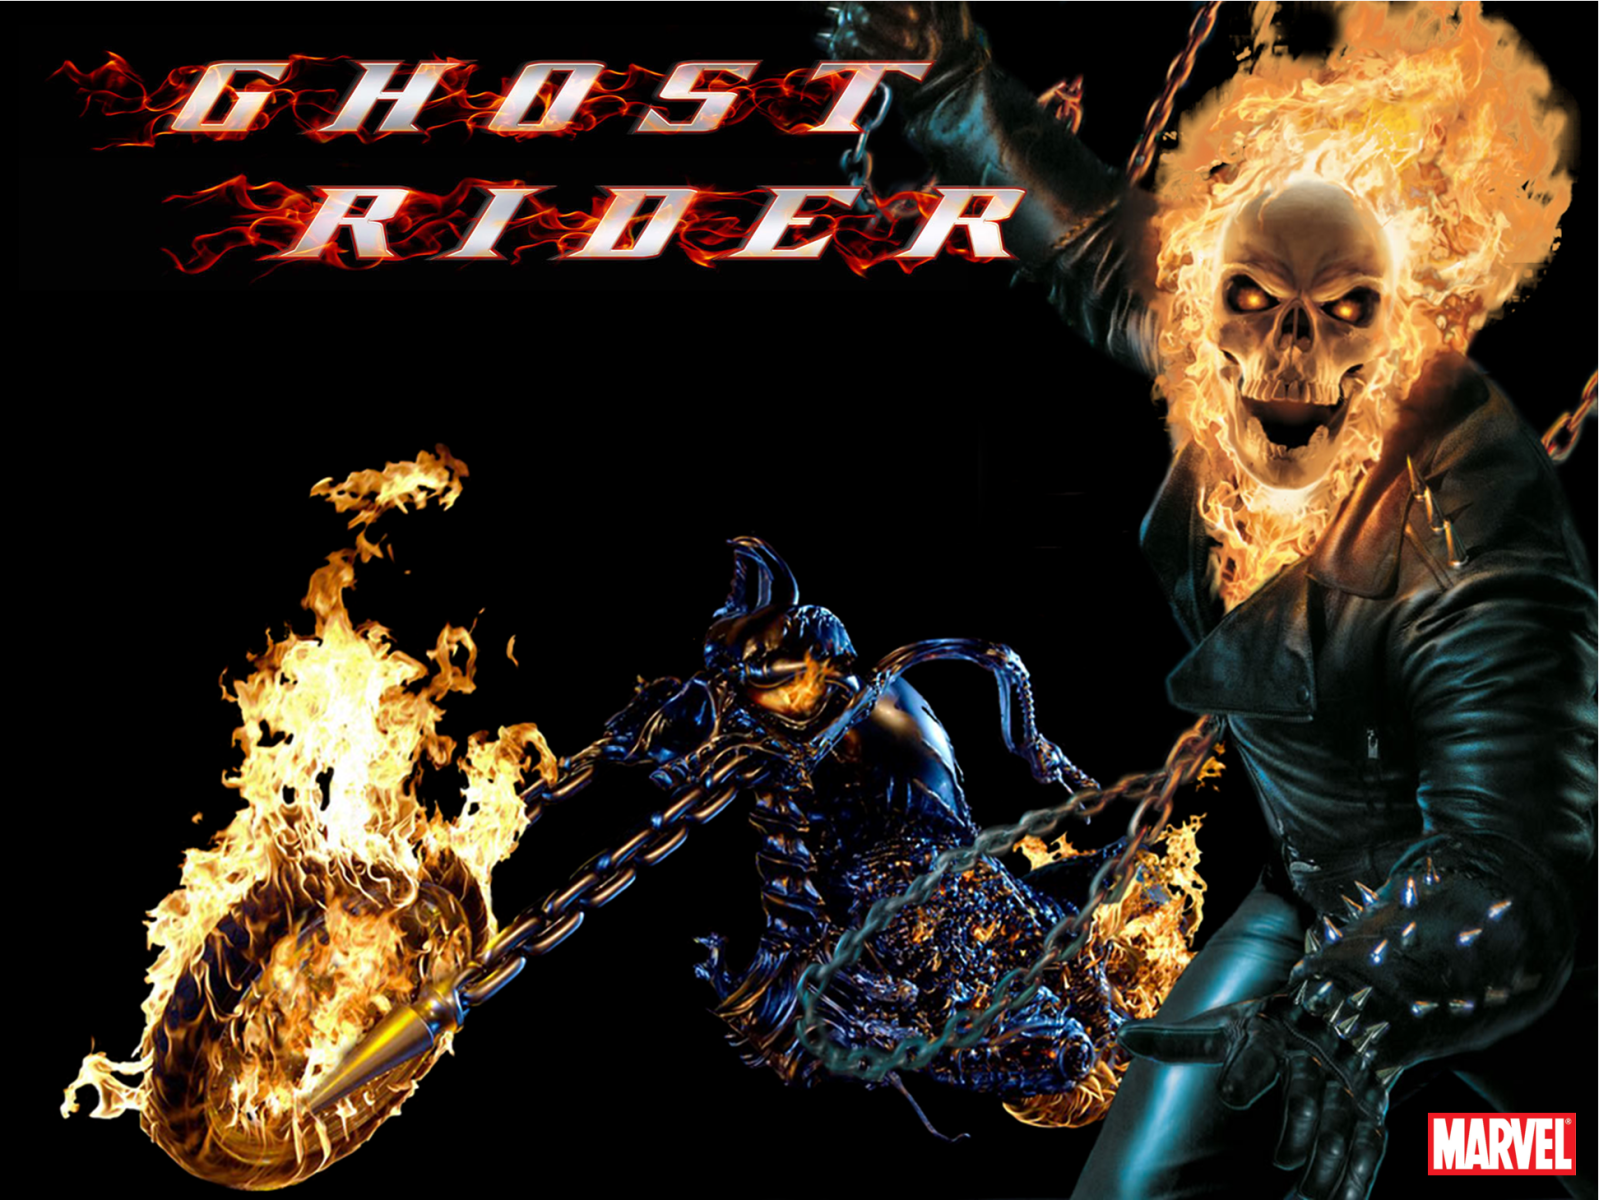 Collage techniques in Ghost Rider wallpapers. Posted by Lessy at 10:32 AM.